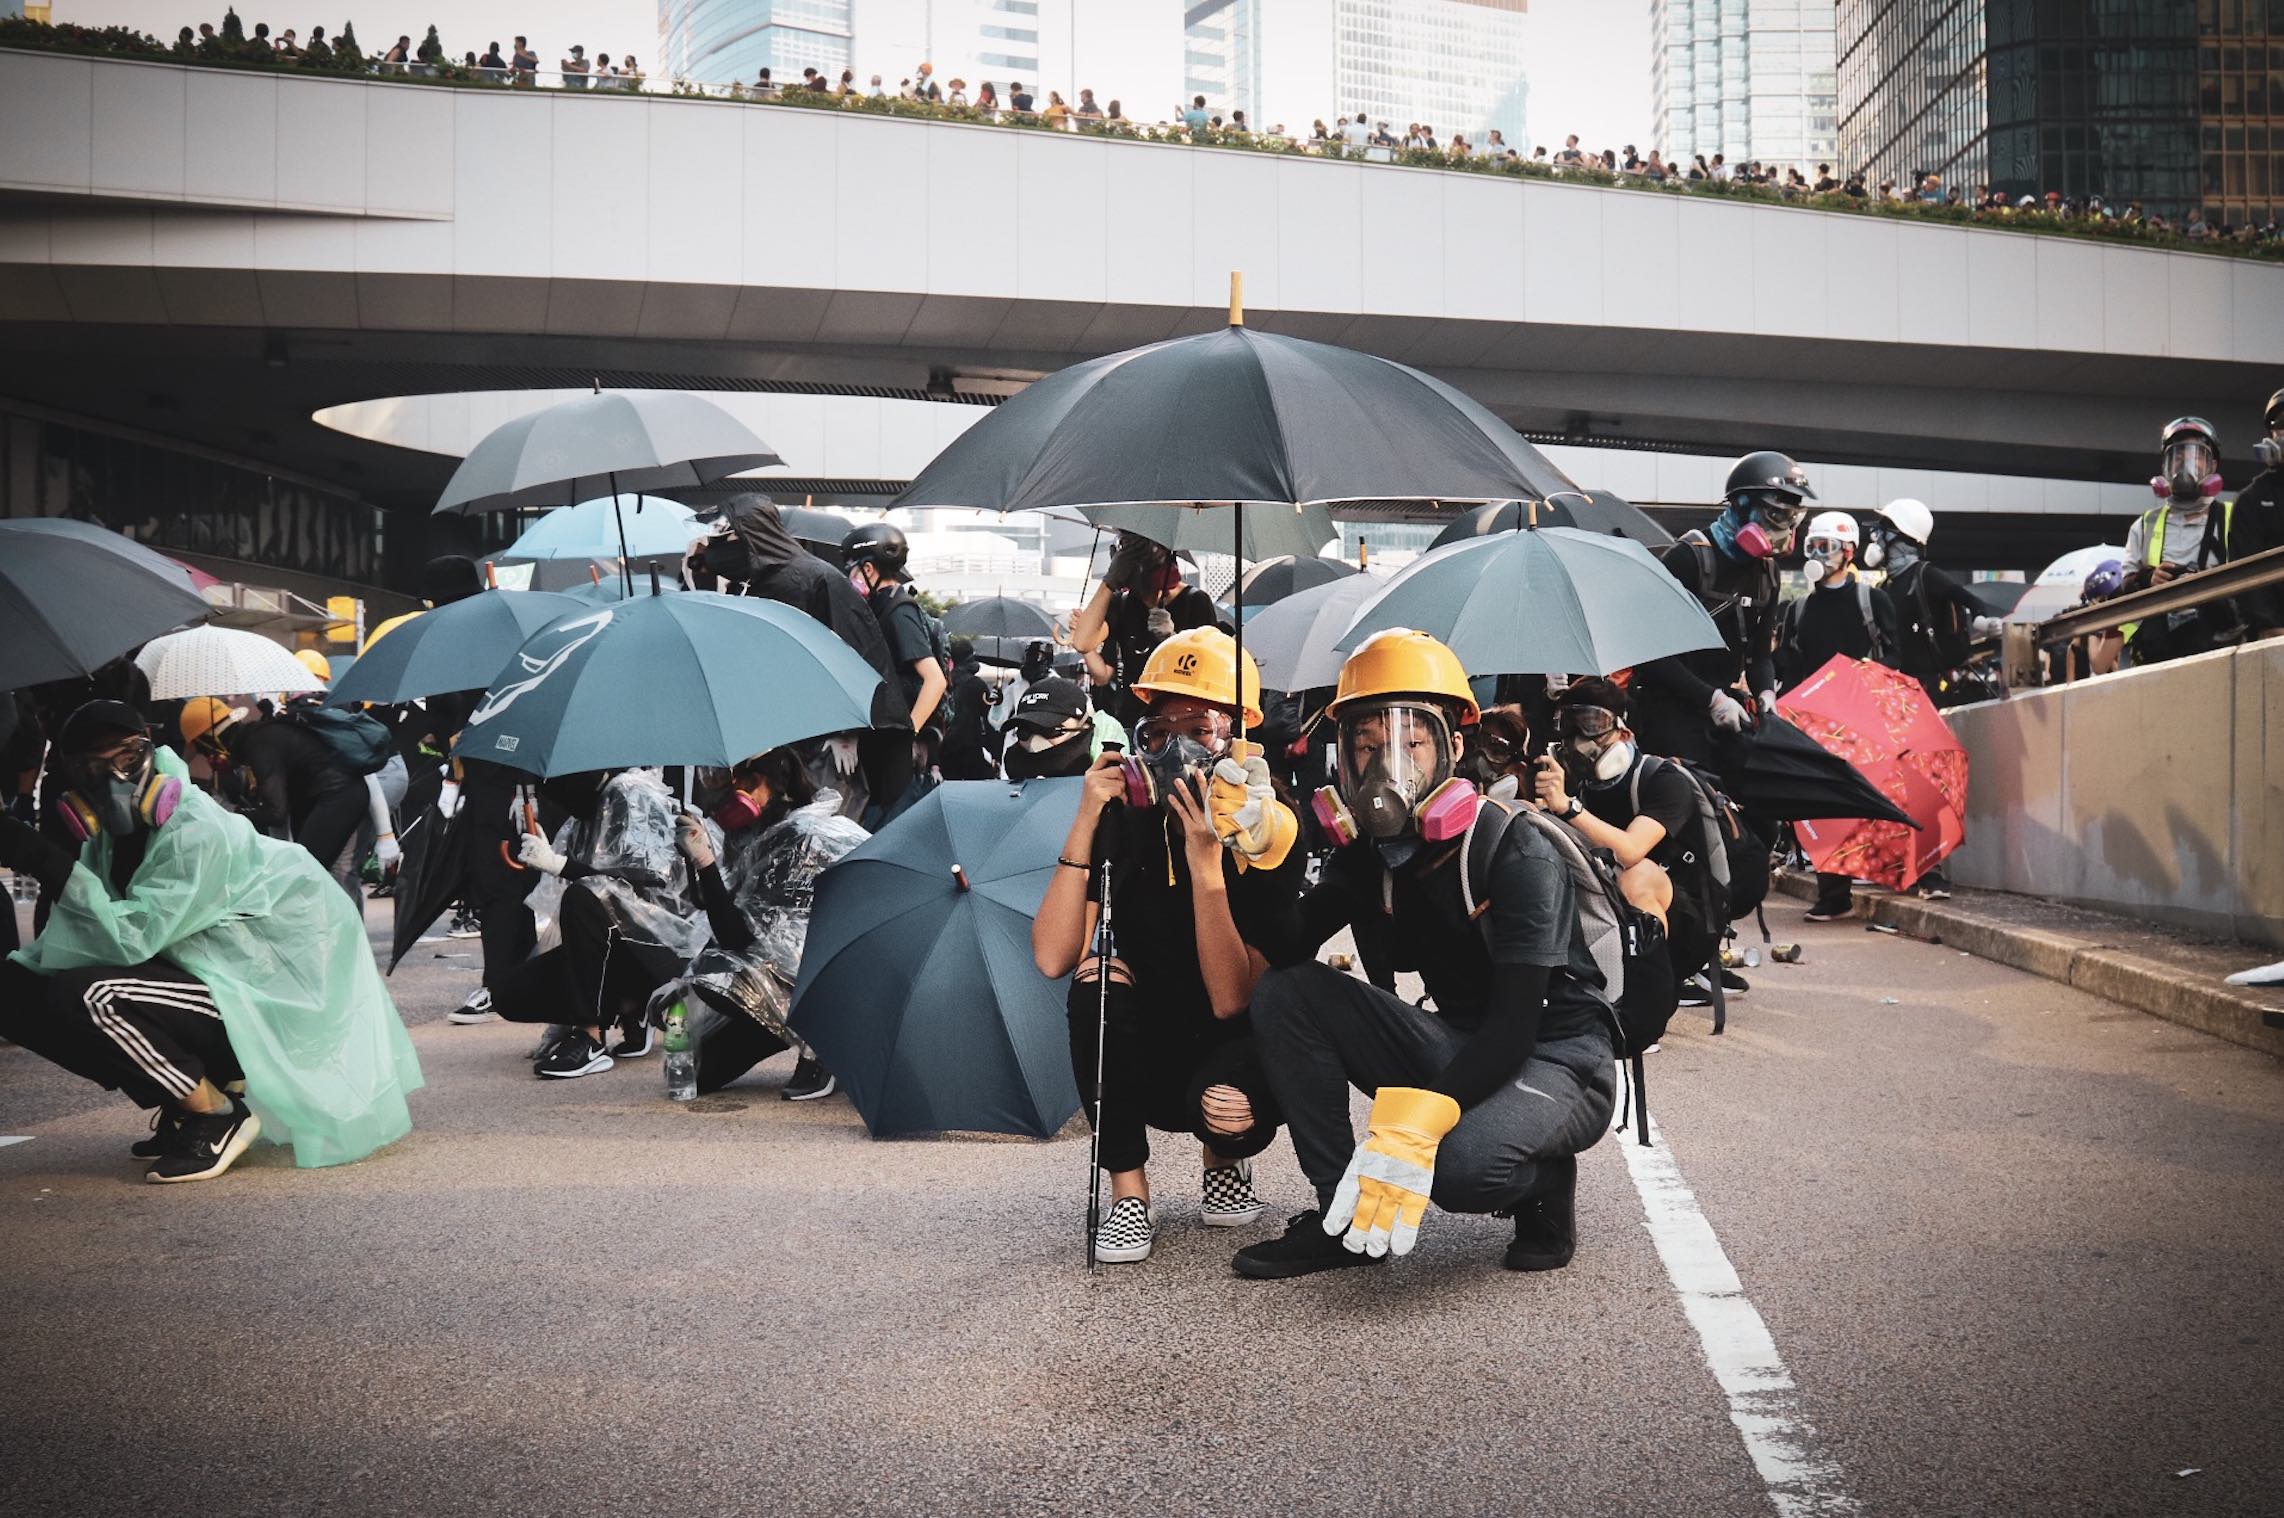 A young couple wait for the police response on Harcourt Road, shortly after water cannons were deployed in Admiralty. Photo by Samantha Mei Topp.